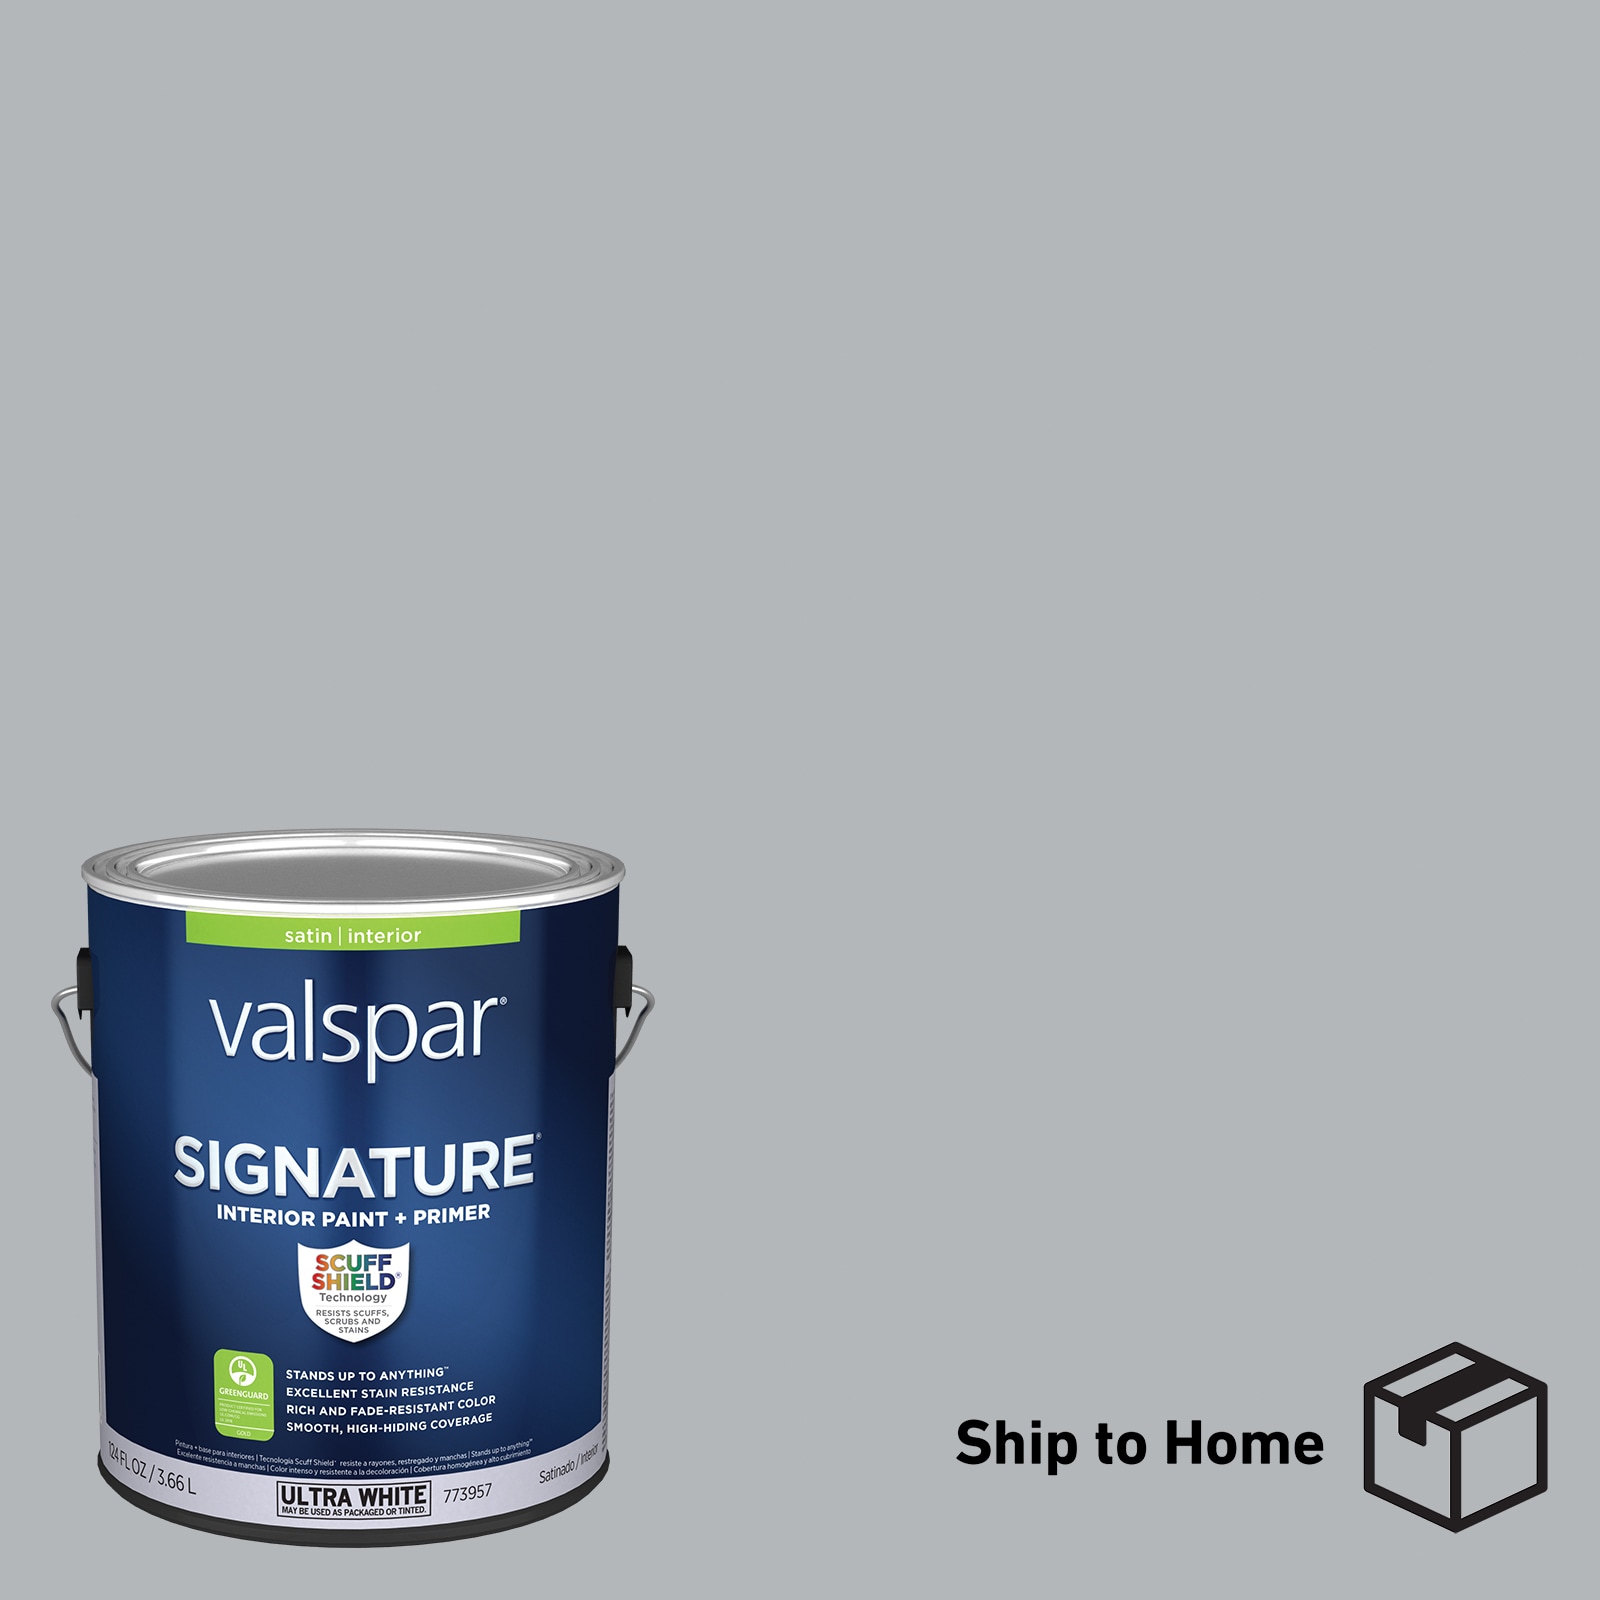 Valspar V018-1 Dainty Daisy Precisely Matched For Paint and Spray Paint